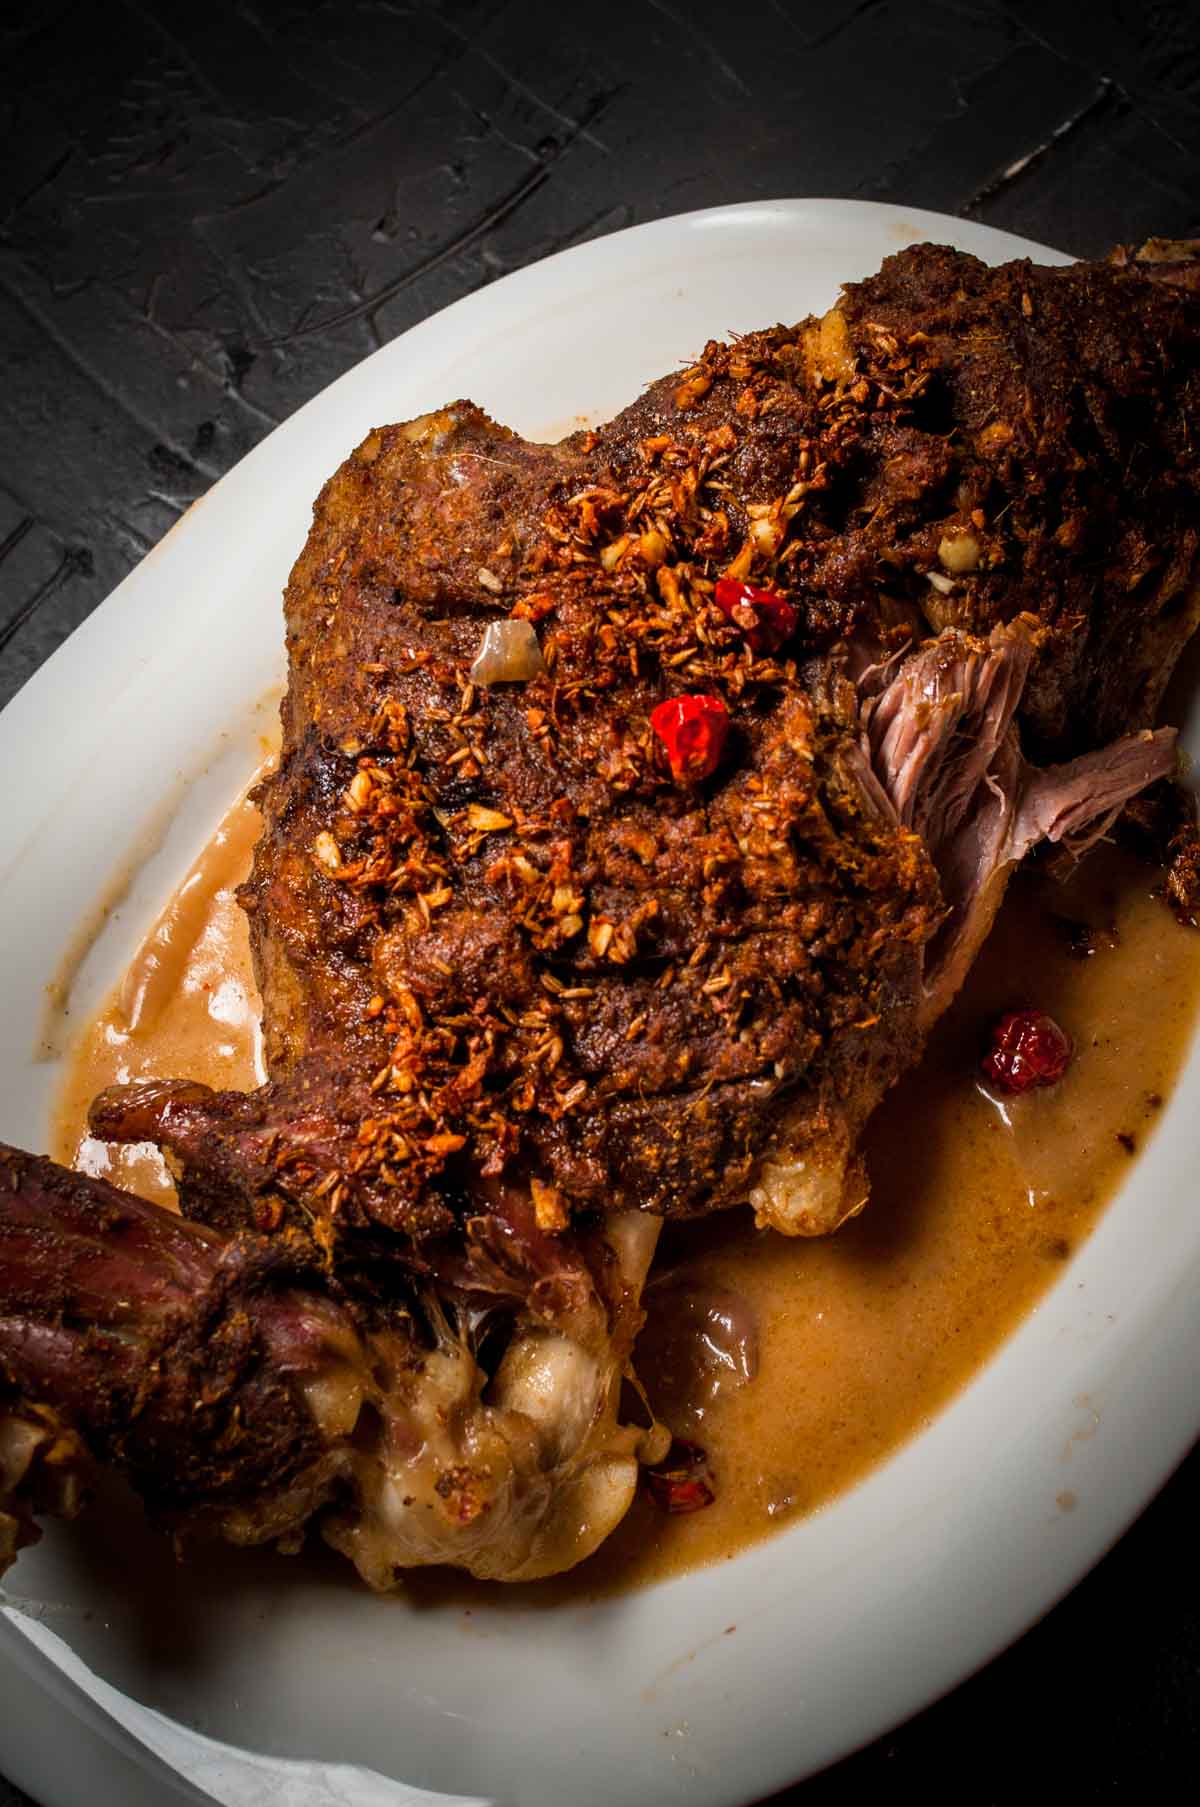 Mutton raan served in a plate over  black background.